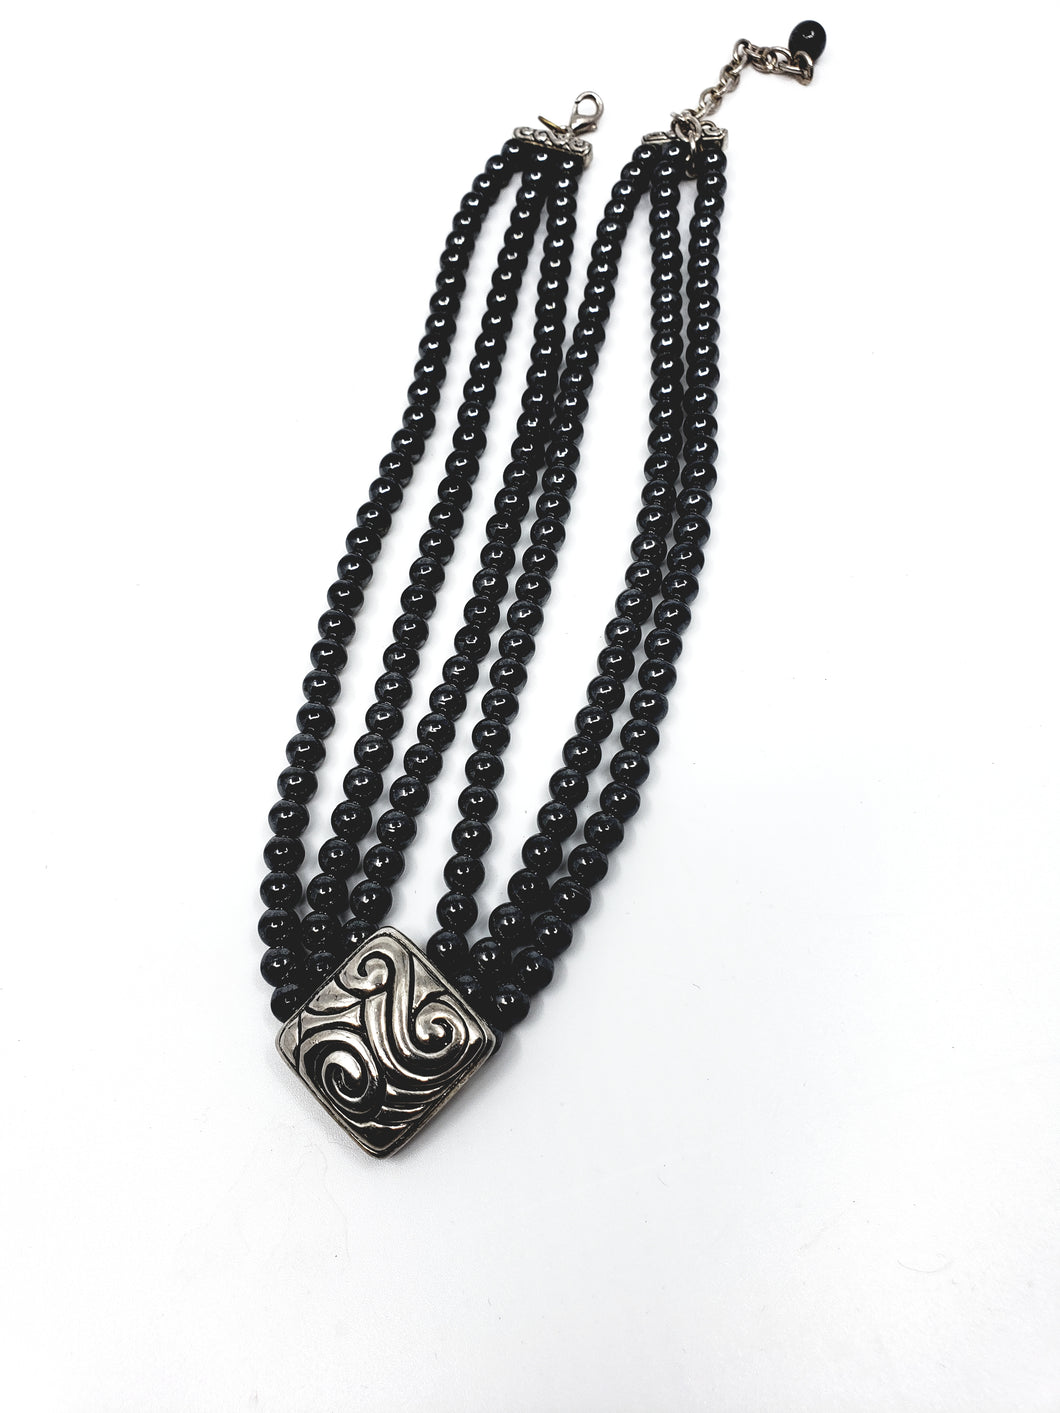 Charcoal colored pearl necklace